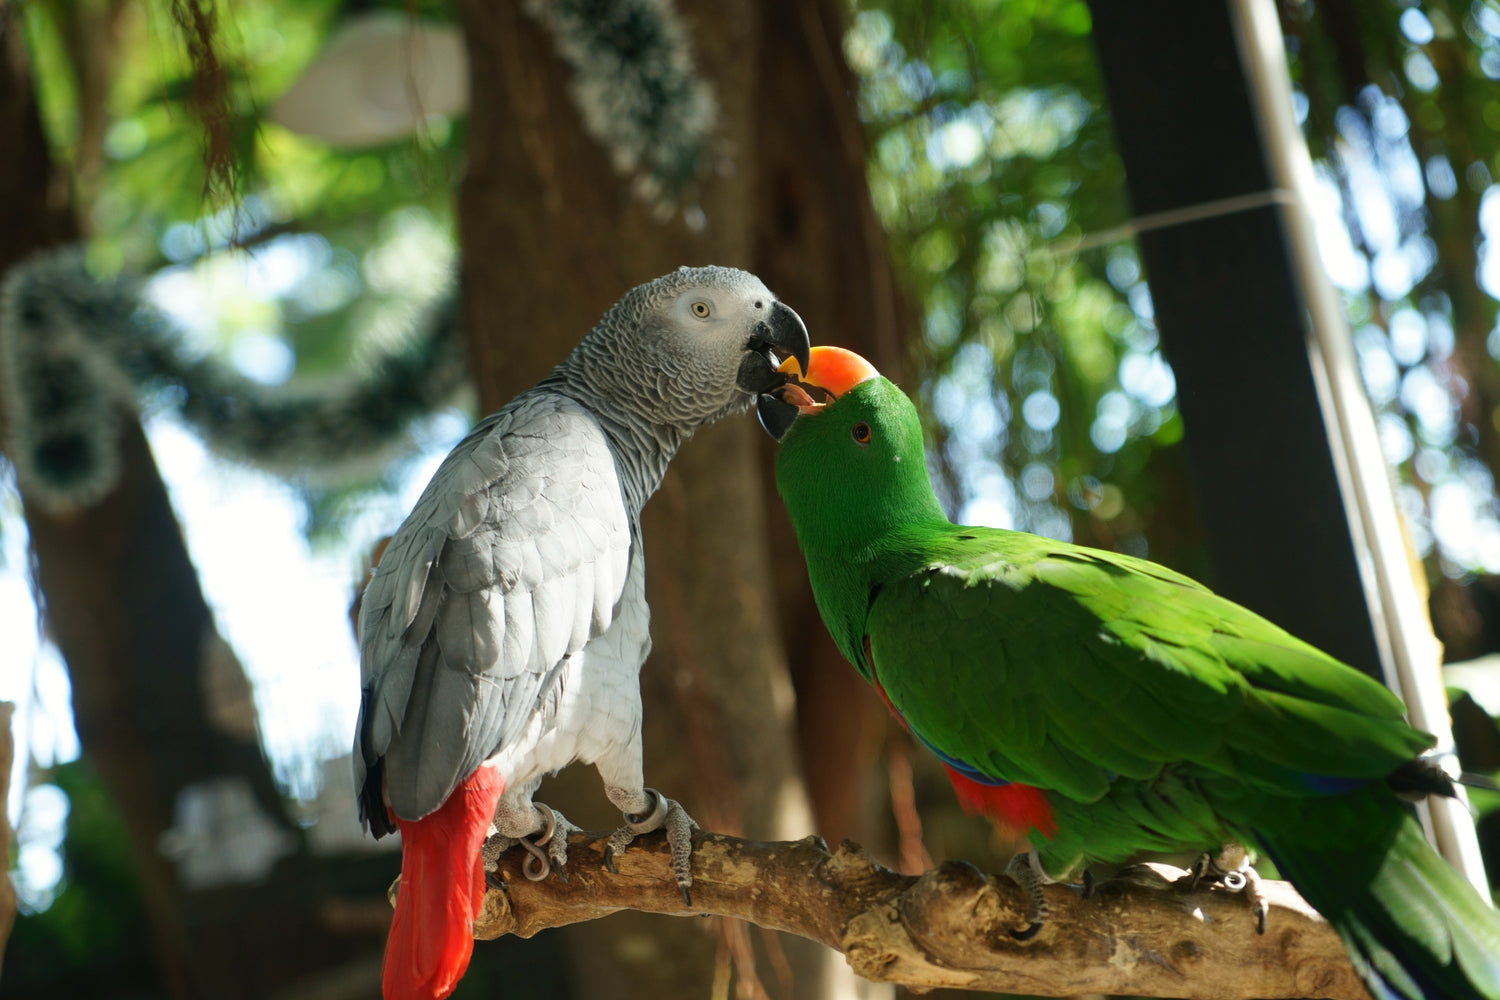 Two parrots in a tree.